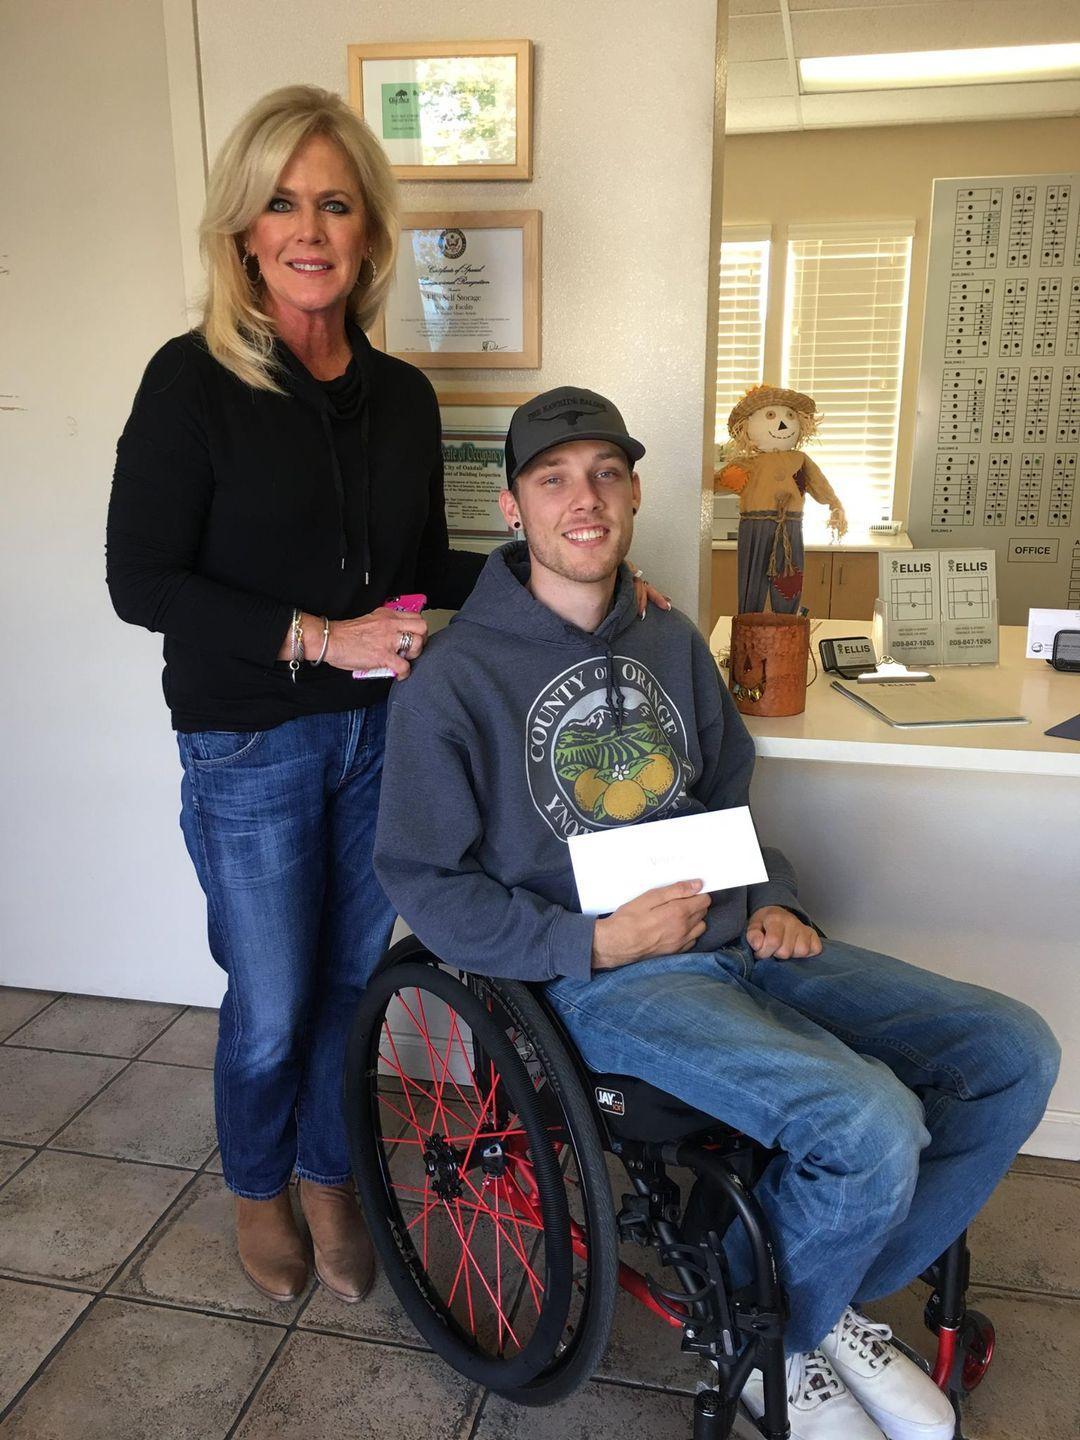 Nick had a Spinal Cord Injury leaving him paralyzed and is a recipient of Danielle's Gift.